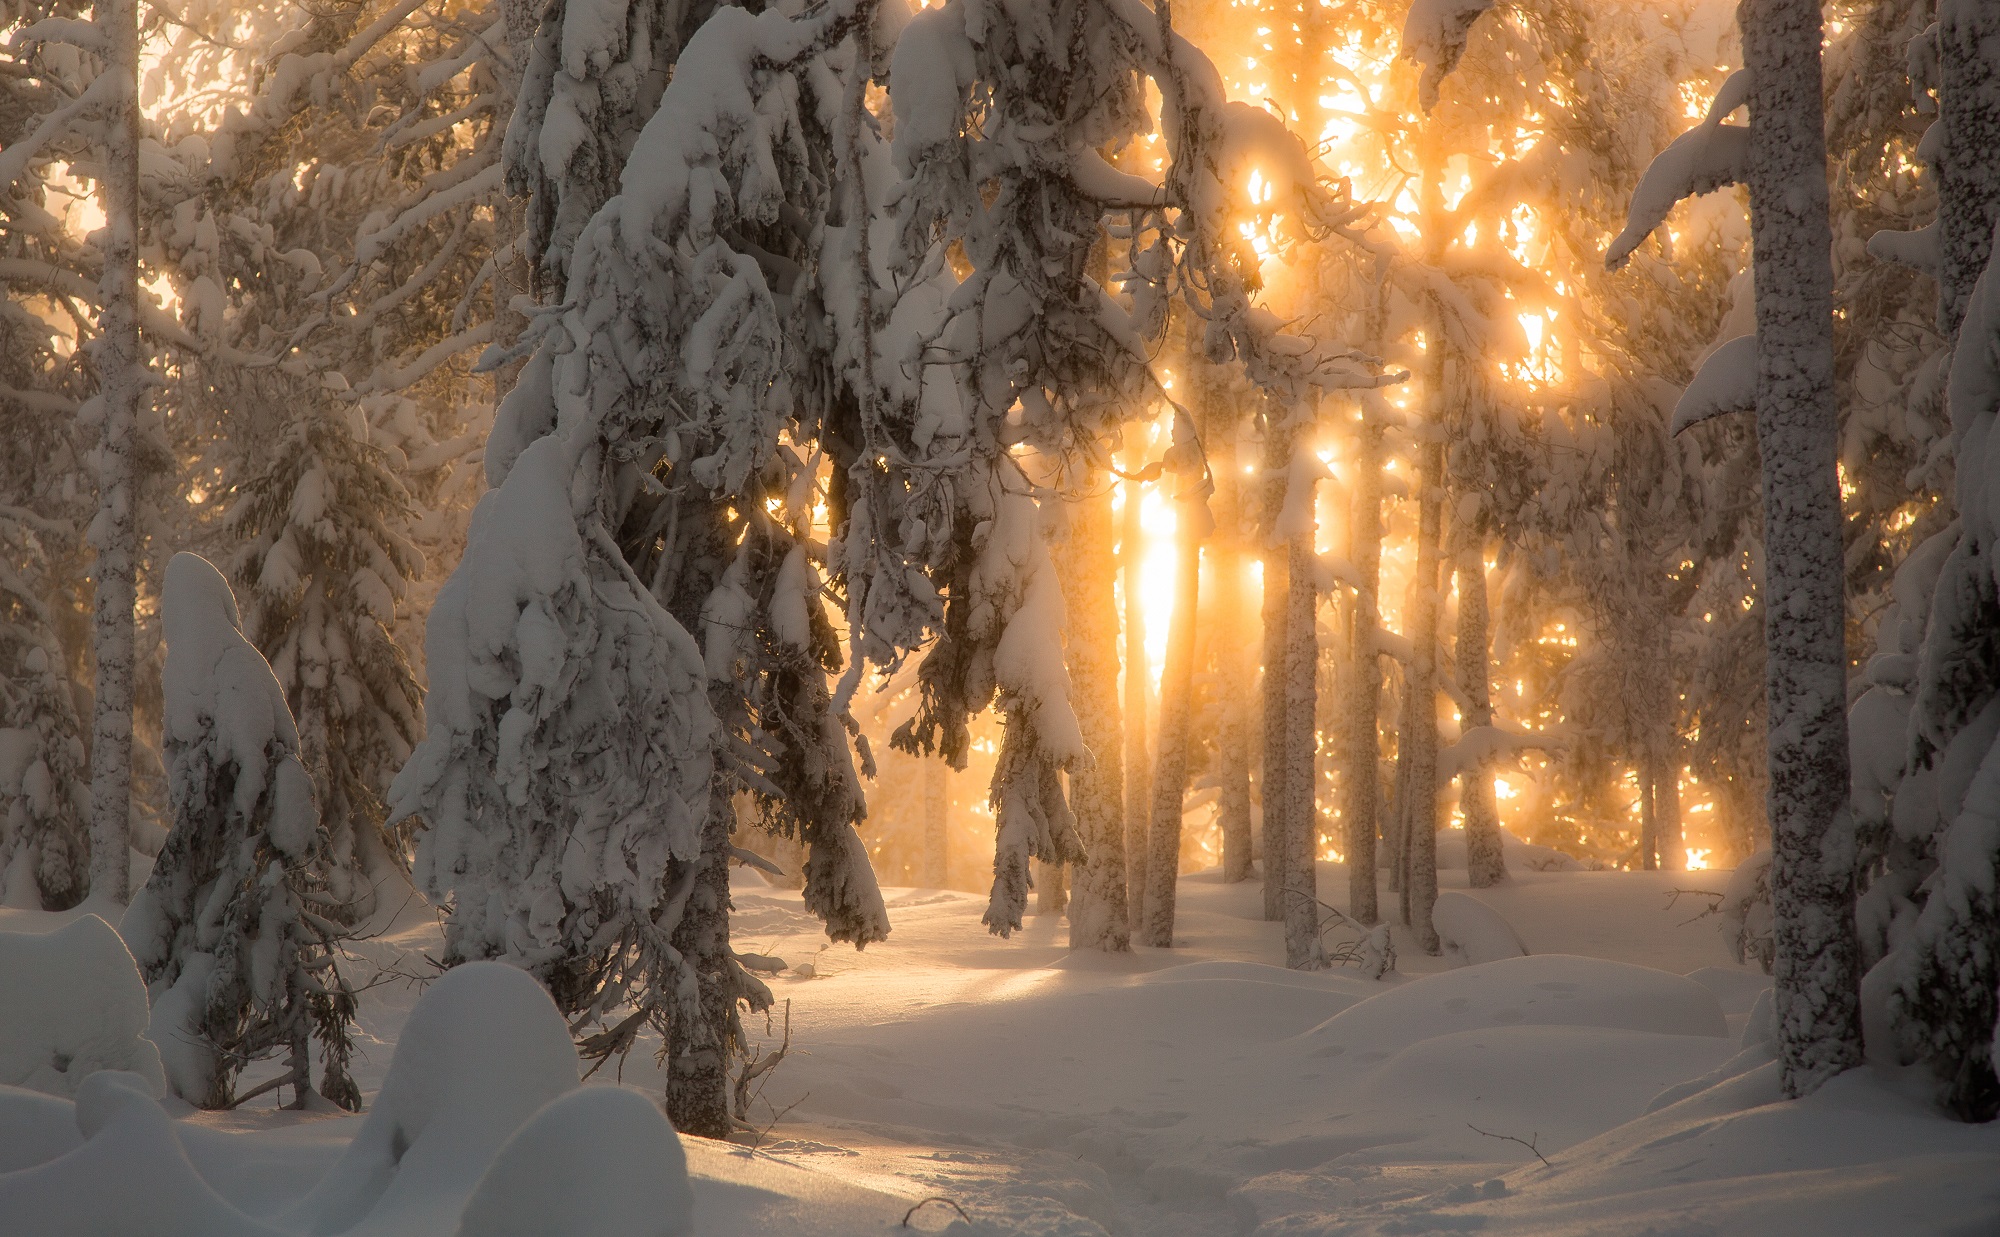 General 2000x1237 Finland forest snow sun rays national park nature winter trees sunlight